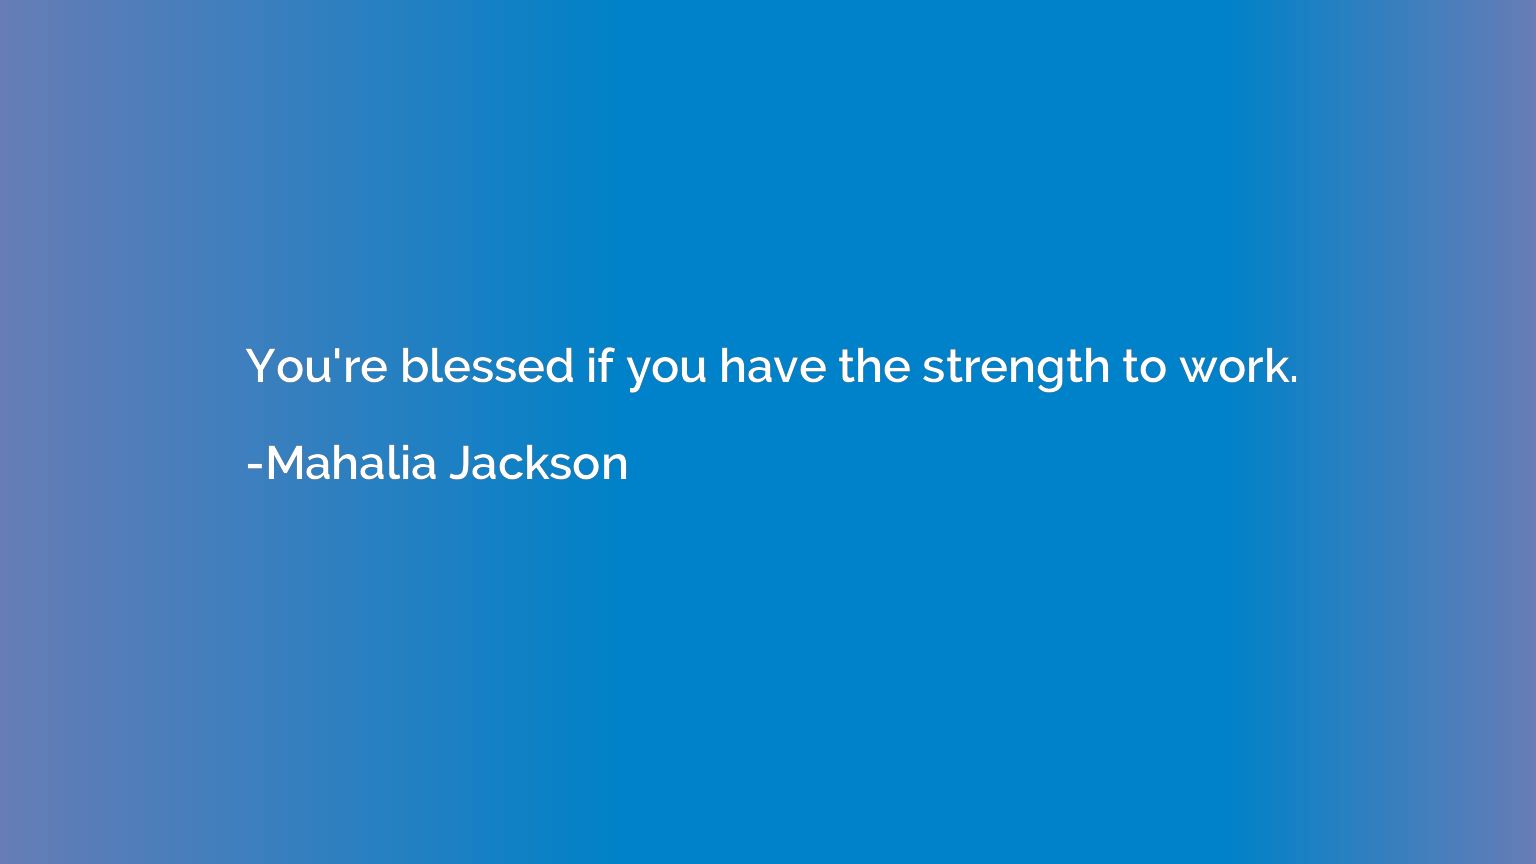 You're blessed if you have the strength to work.